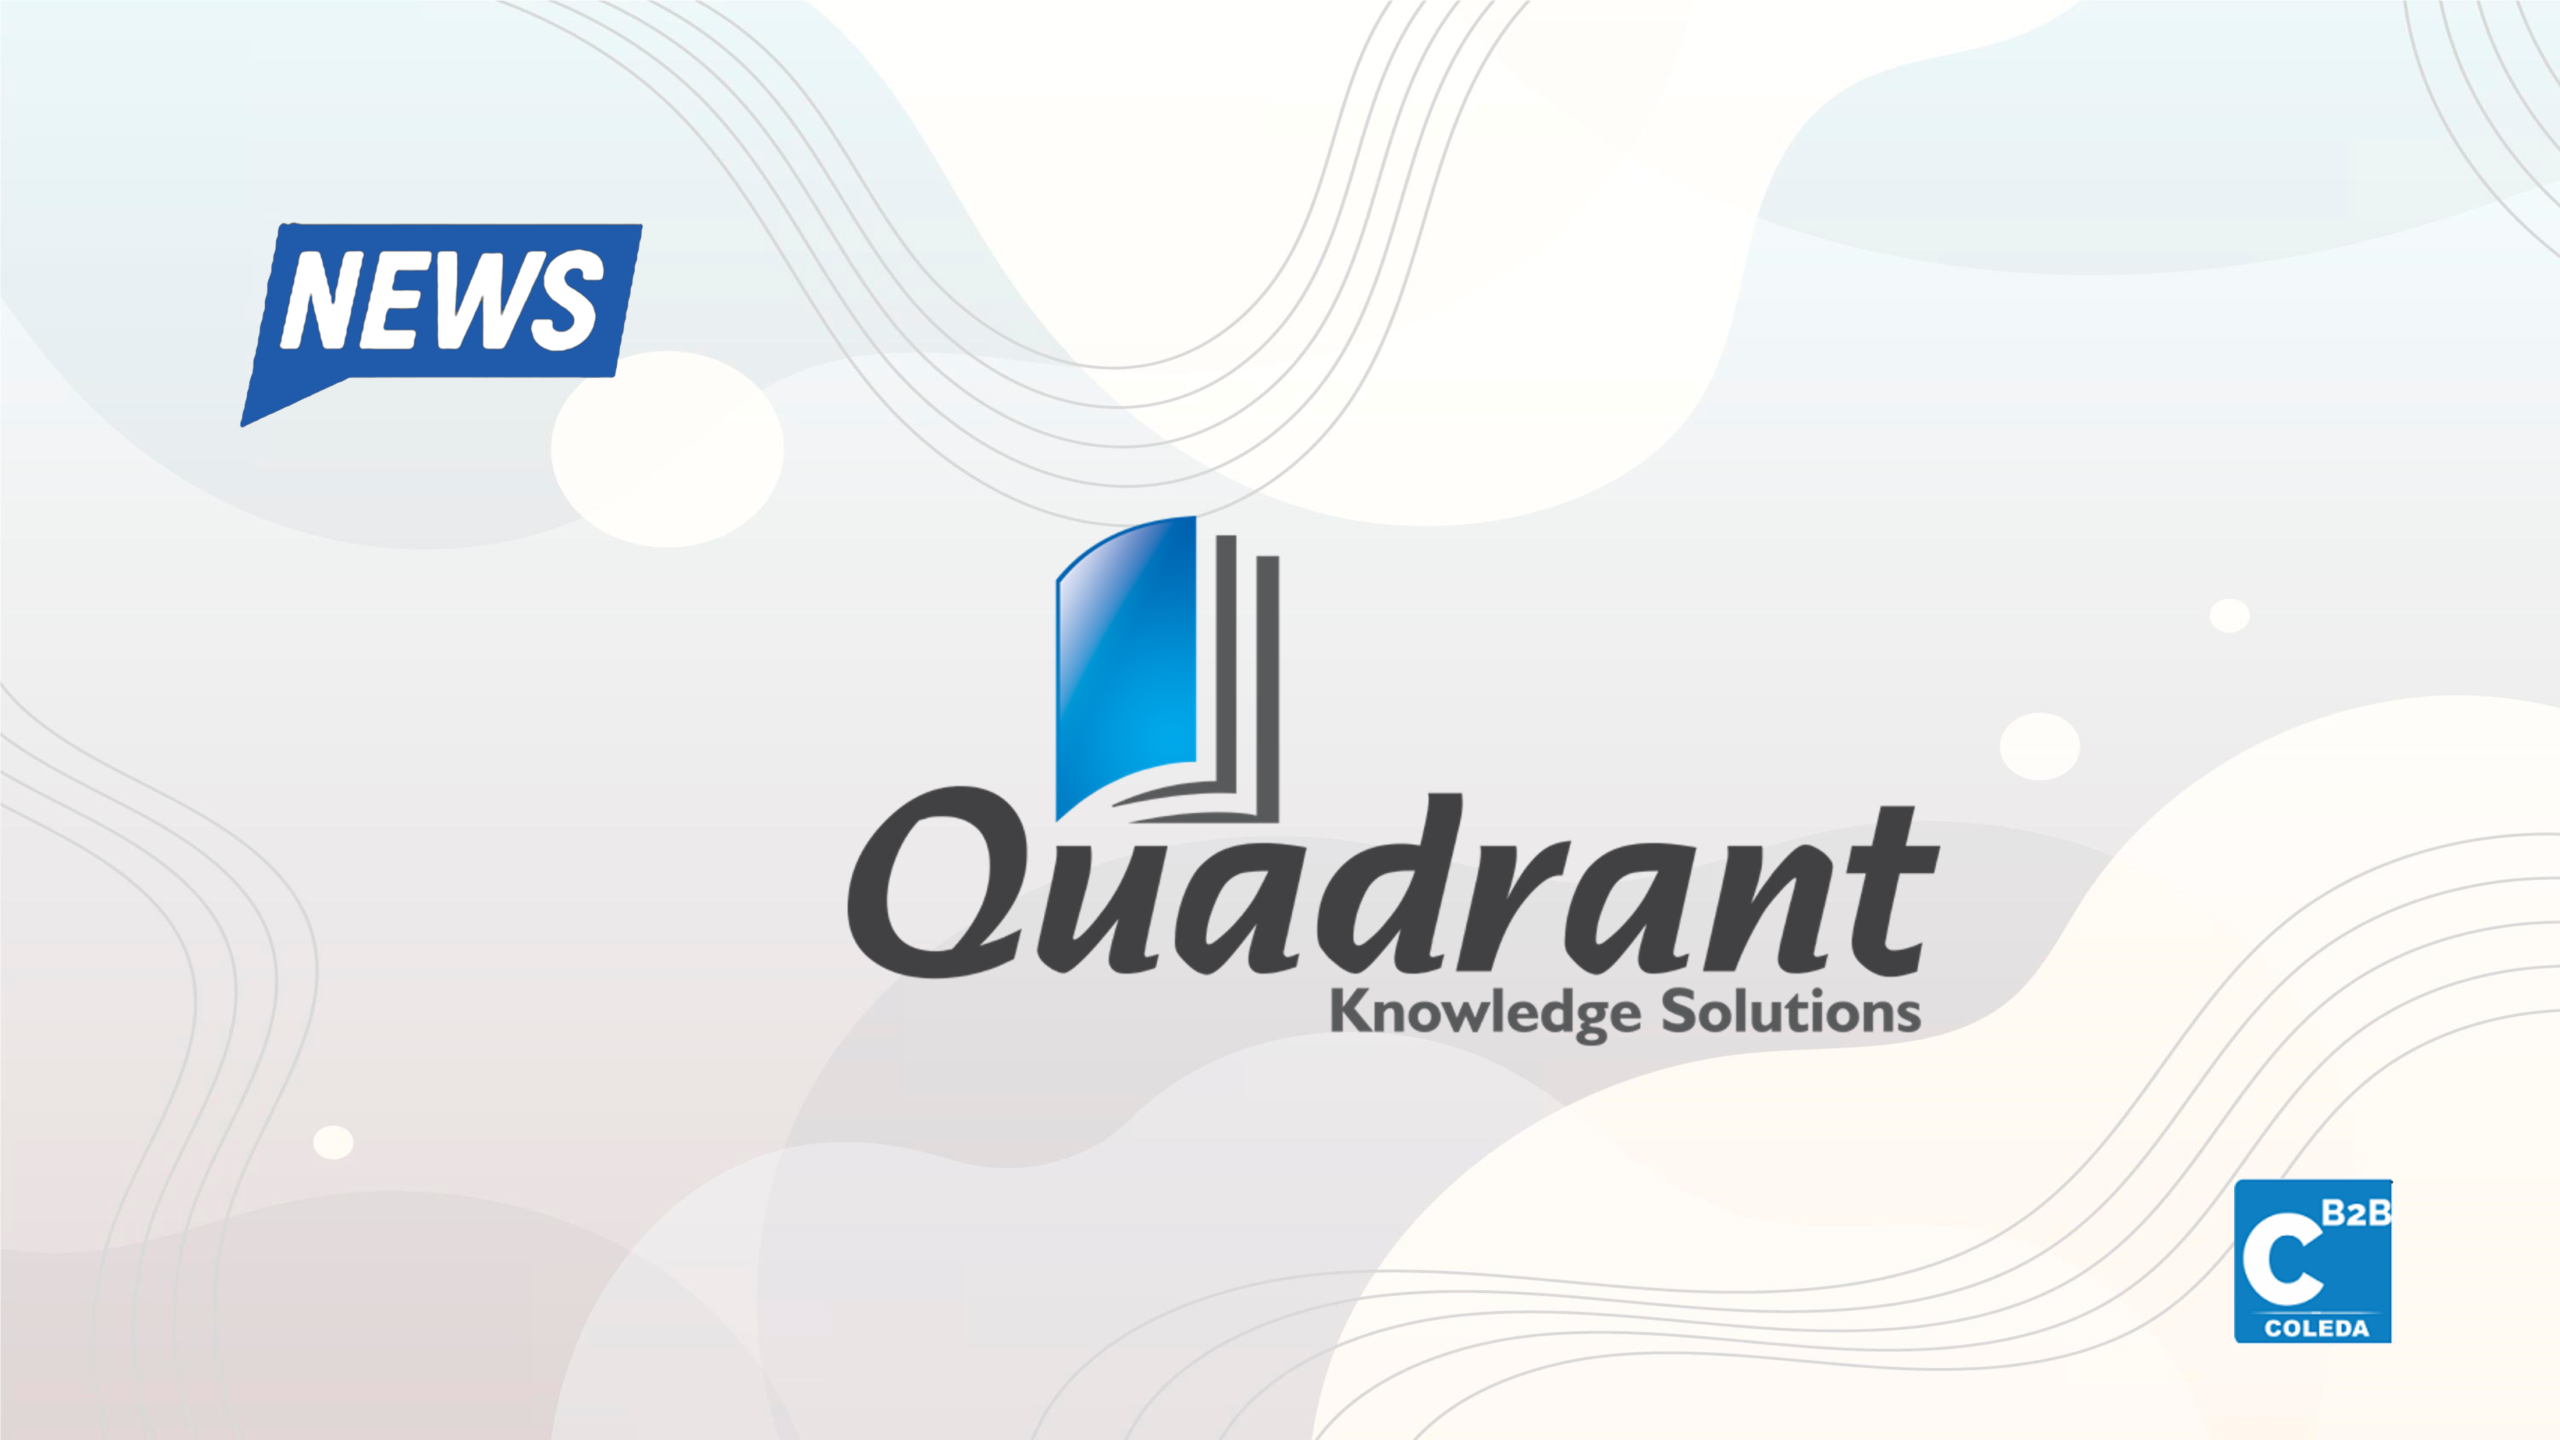 Spark Matrix gets recognized as a technological leader by Quadrant Solutions